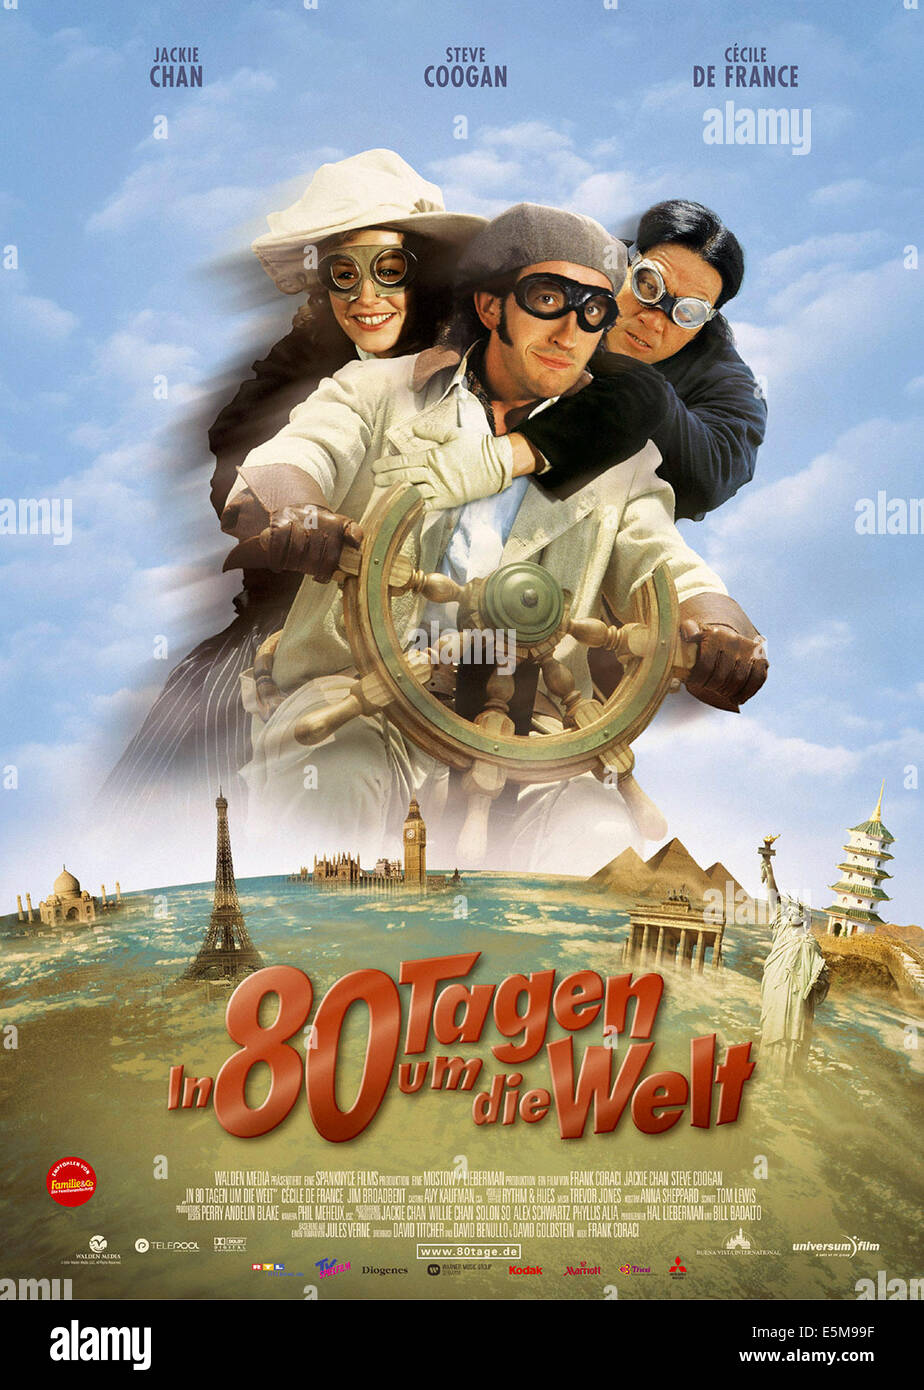 AROUND THE WORLD IN EIGHTY DAYS, Cecile De France, Steve Coogan, Jackie Chan, 2004, (c) Buena Vista/courtesy Everett Collection Stock Photo